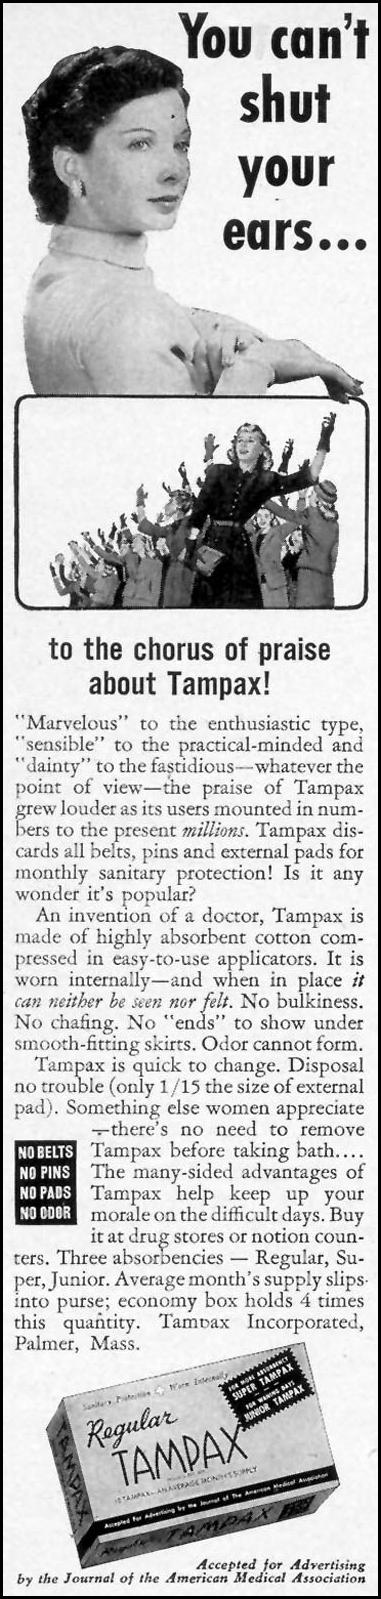 TAMPAX
WOMAN'S DAY
09/01/1948
p. 84